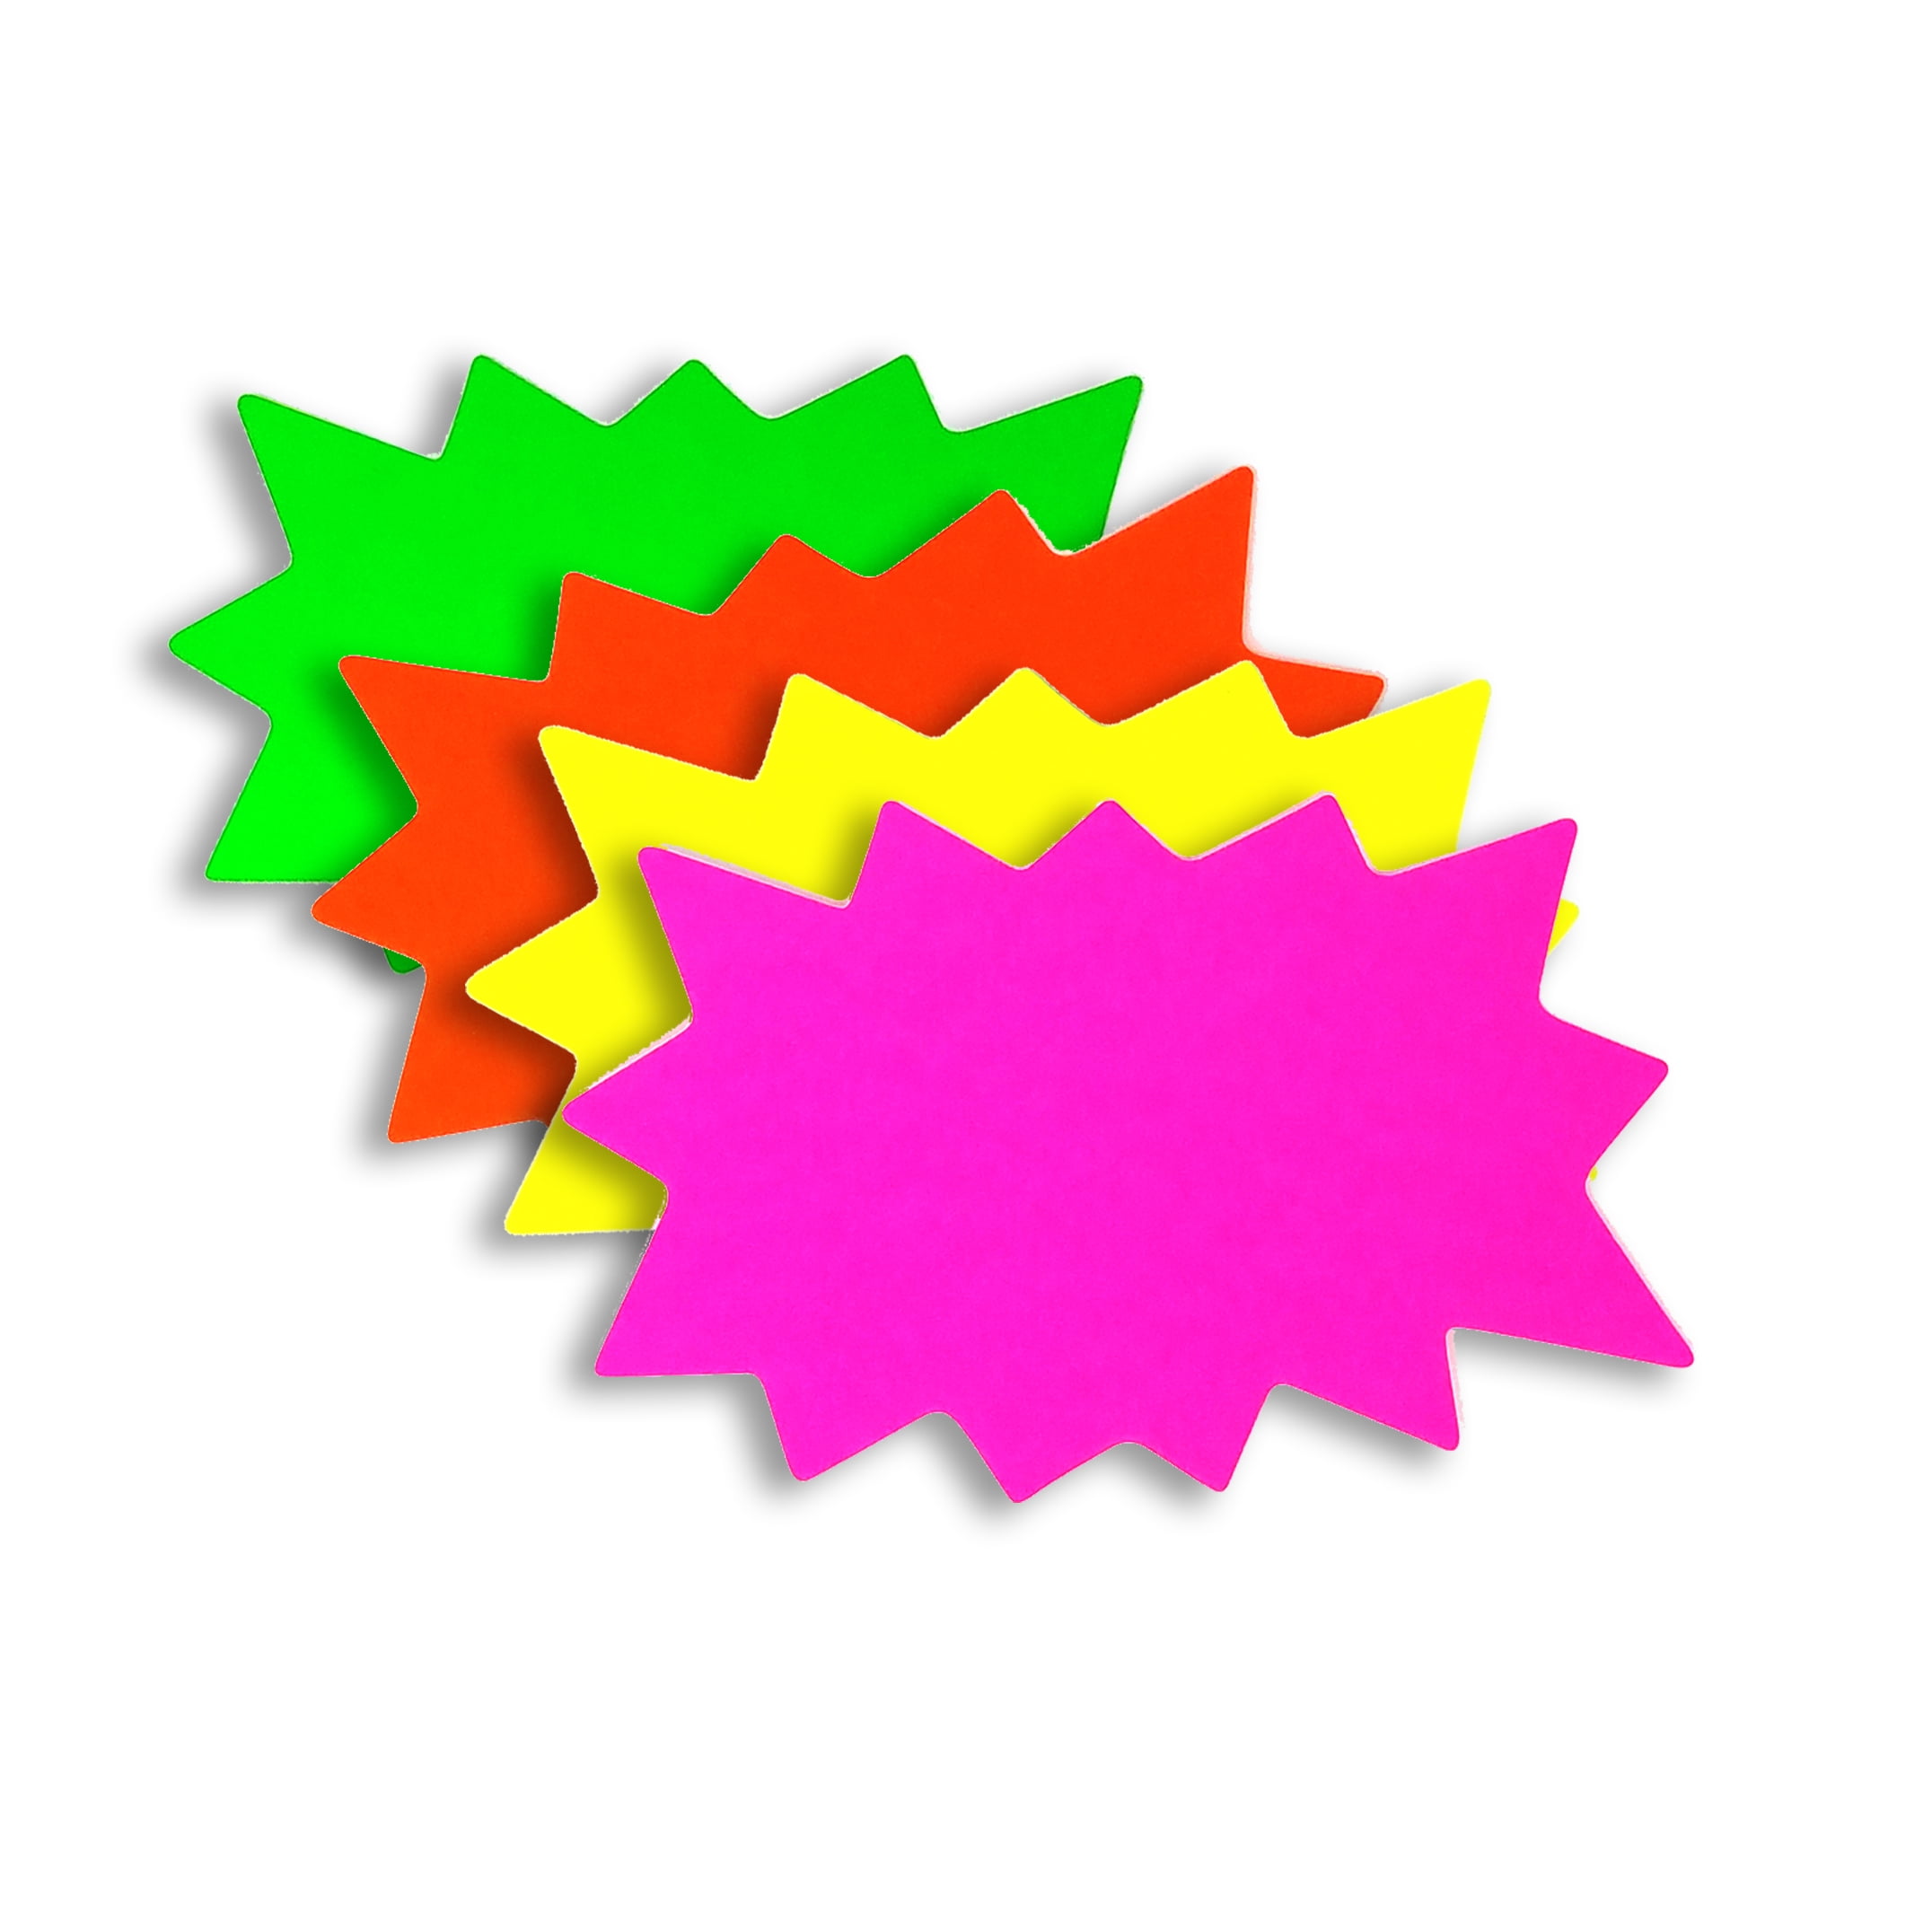 1"x1" Round 200pk Fluorescent Starburst Price Neon Retail Tags Cards Signs NEW 